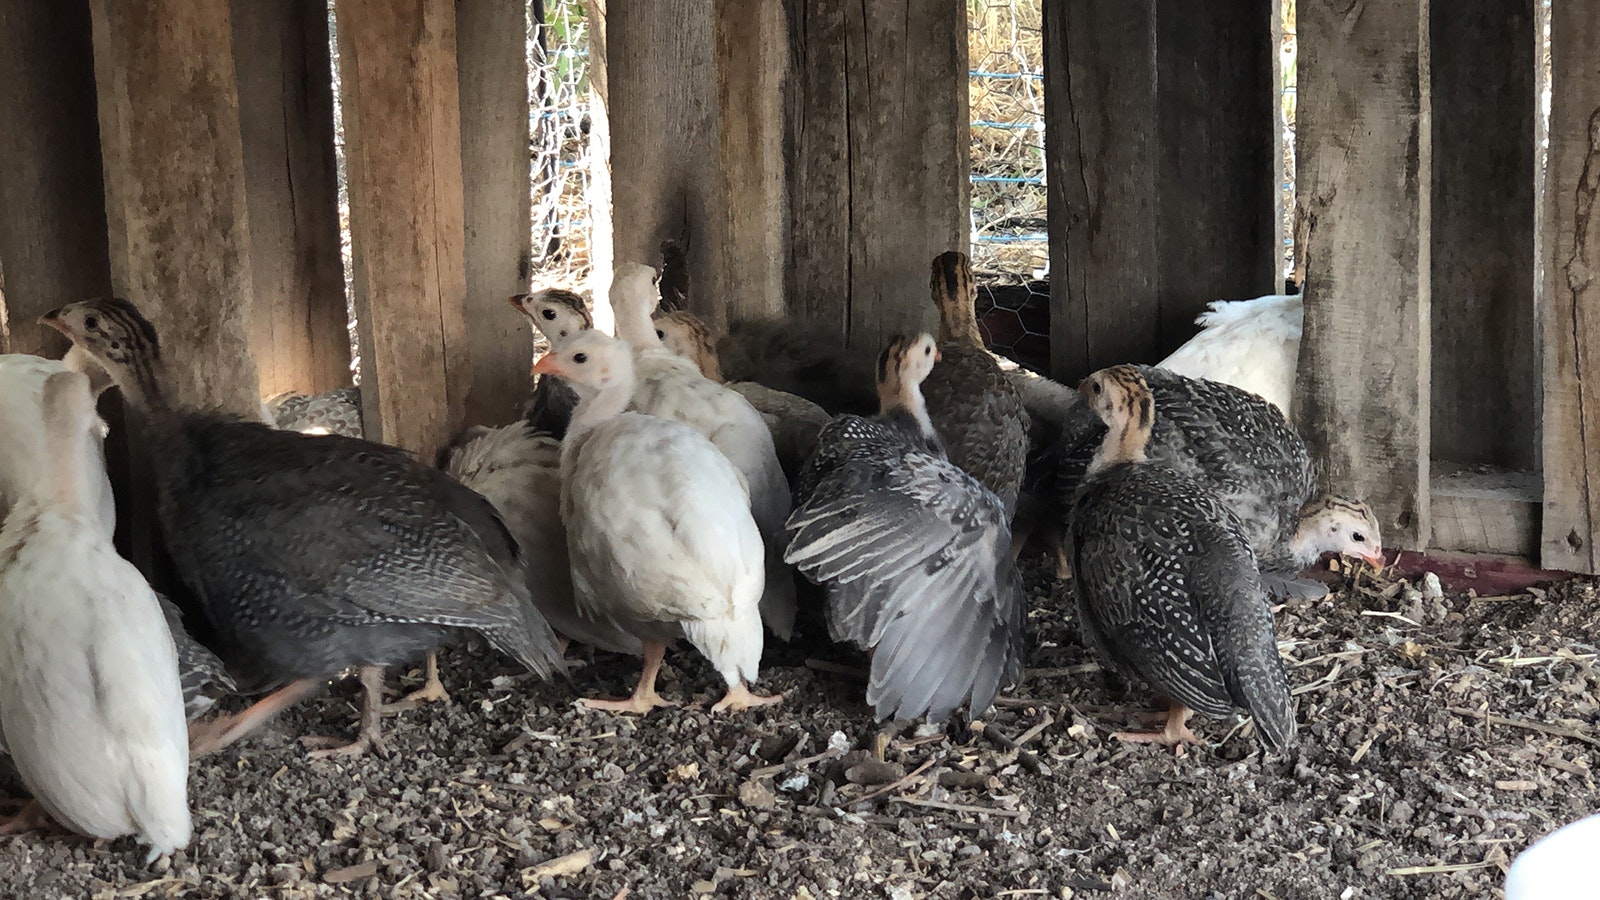 Guinea fowl are hardy enough to handle all of Wyoming’s seasons, so long as they have a good place to huddle up.